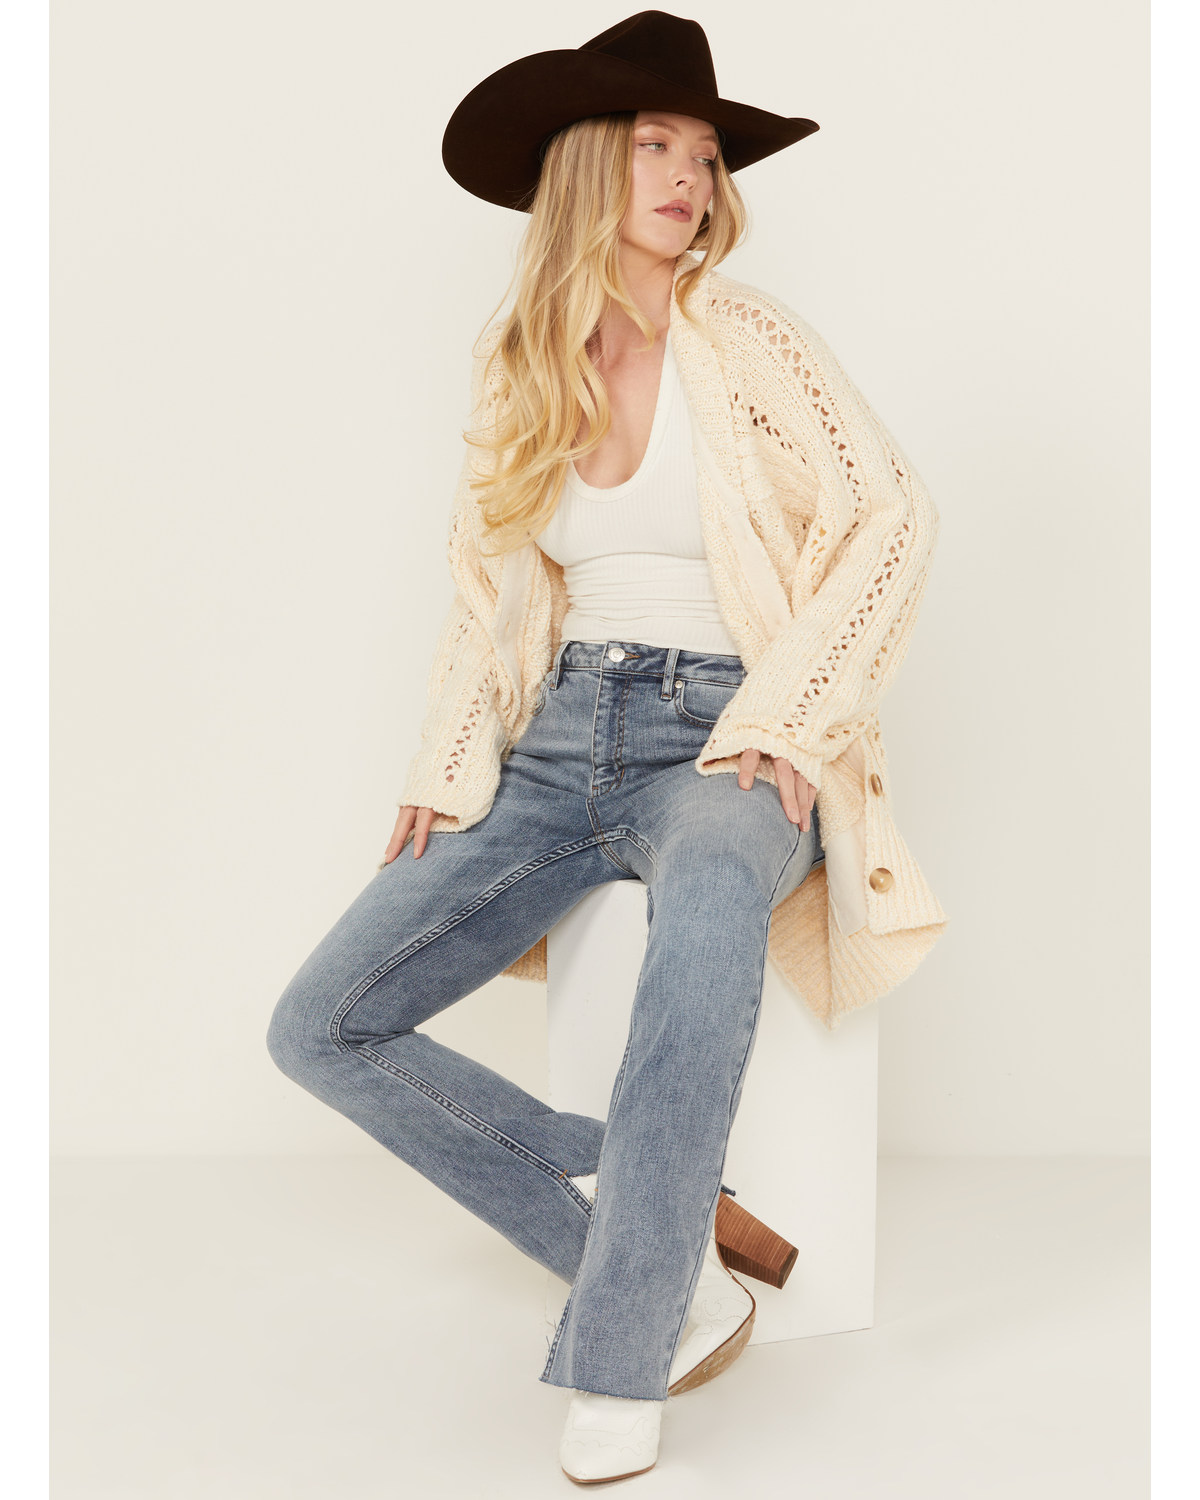 Free People Women's Cable Knit Button-Down Cardigan